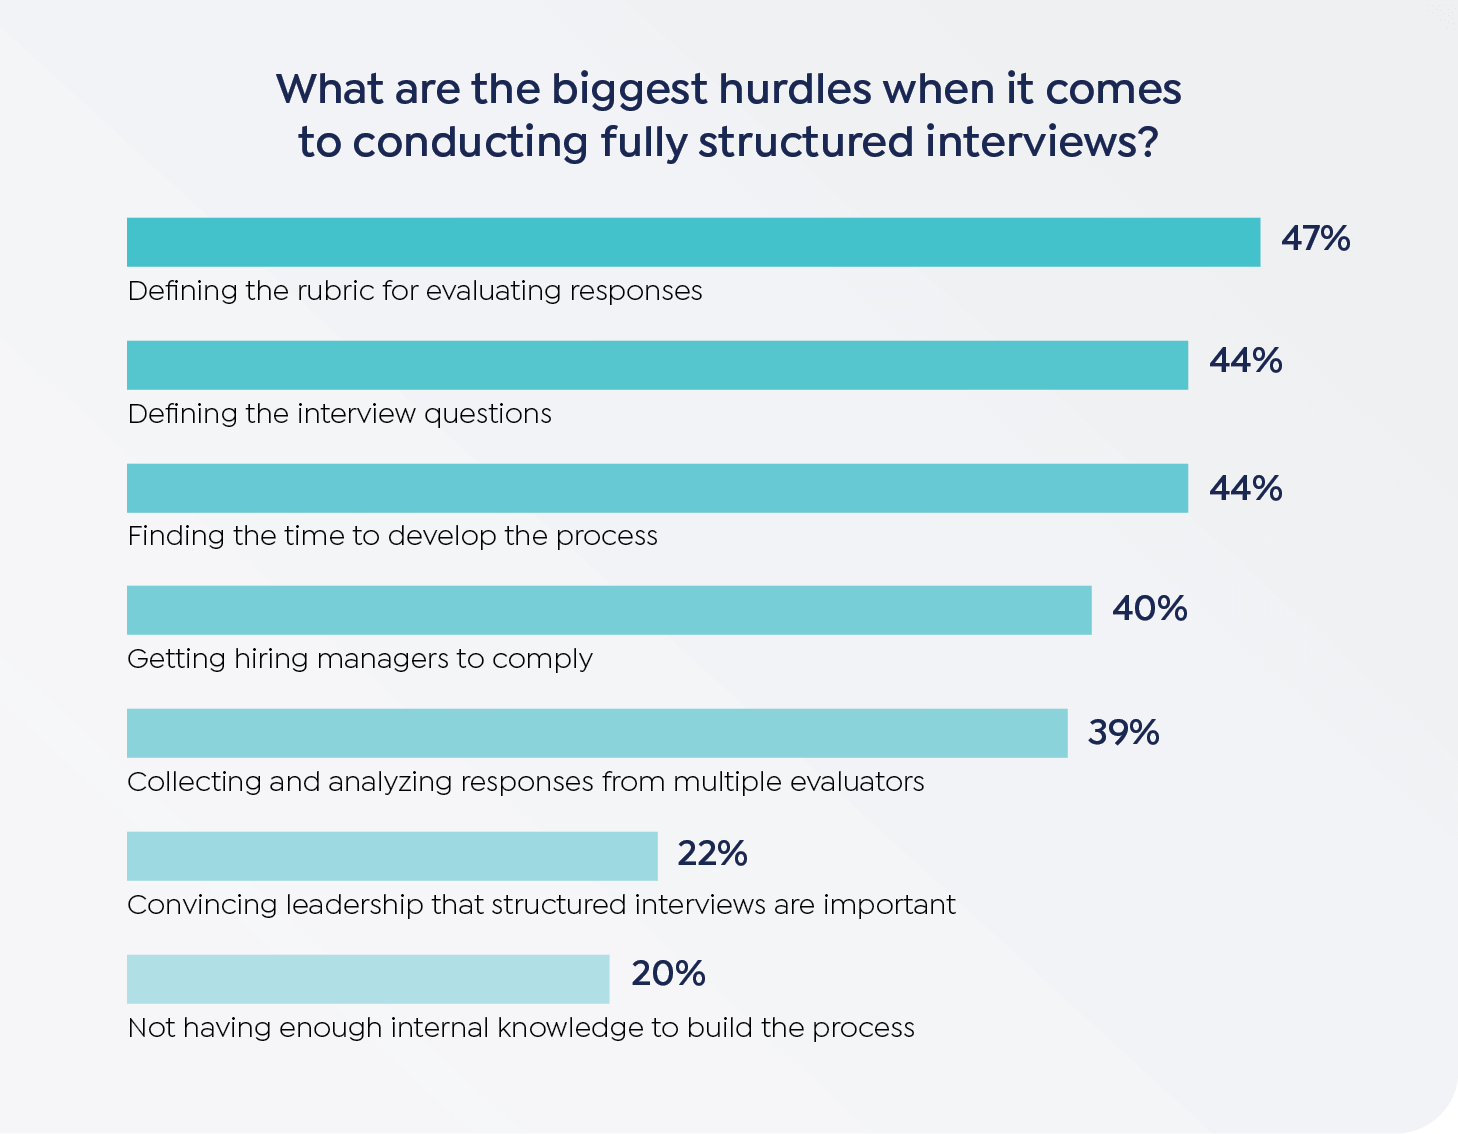 Bar chart showing the biggest hurdles when it comes to conducting fully structured interviews